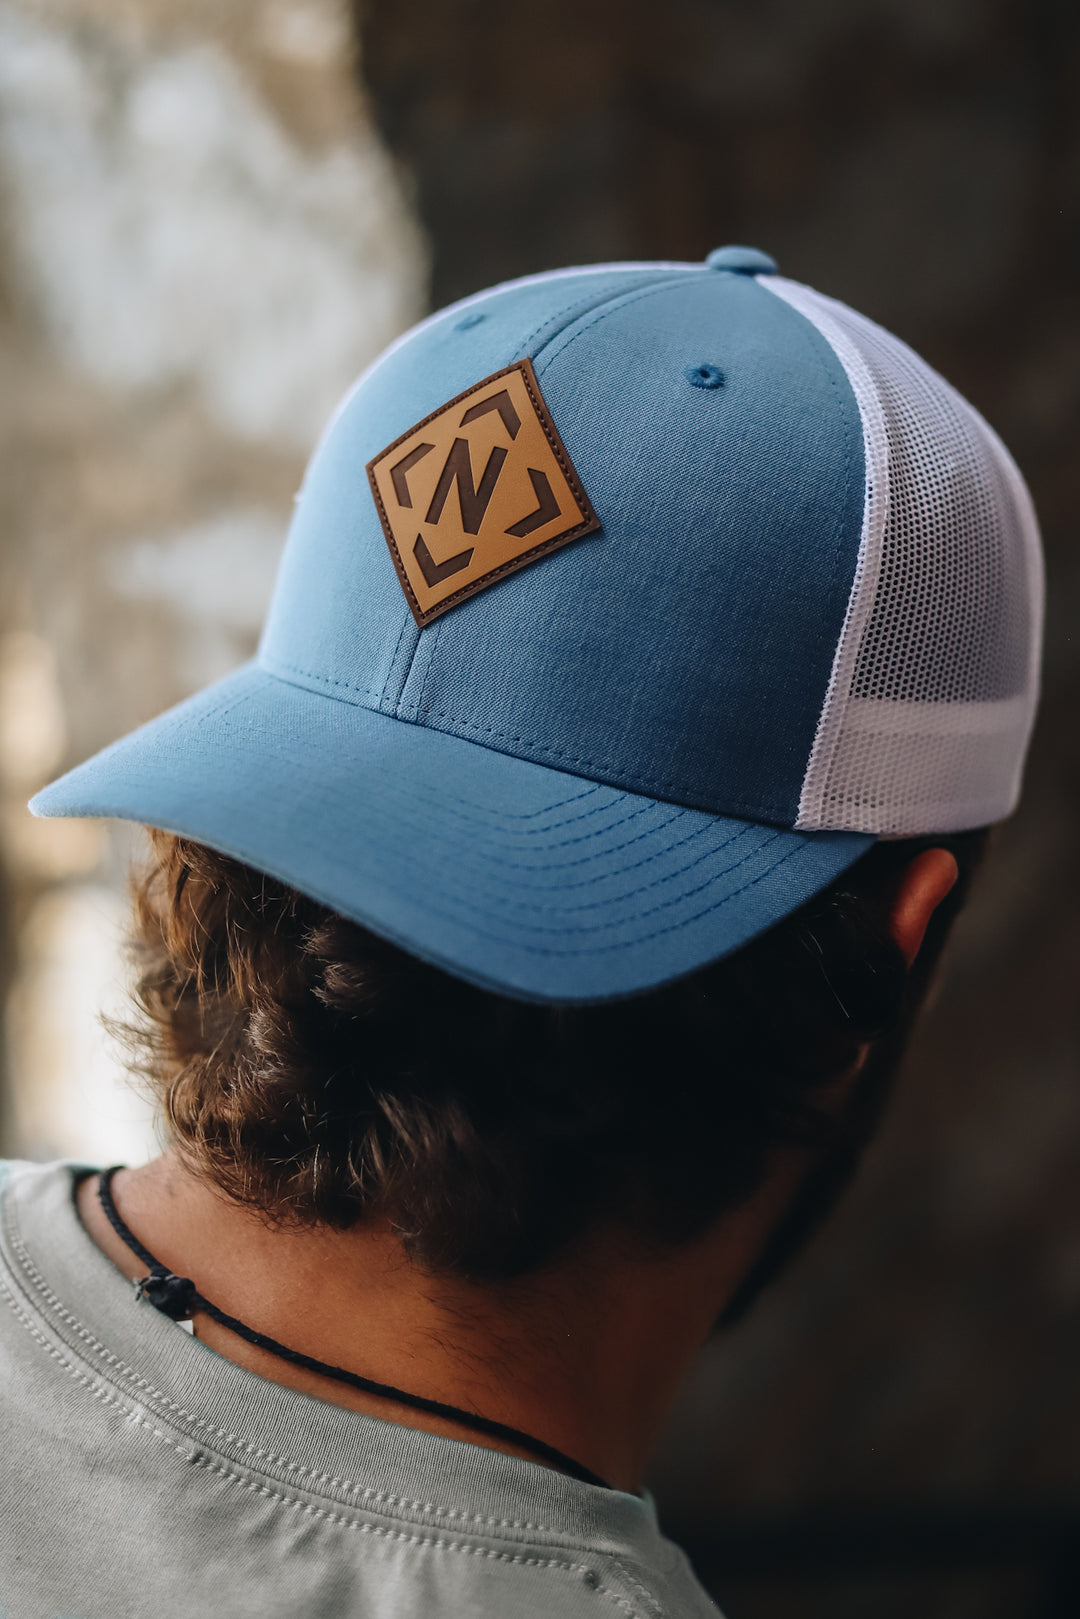 ALL ICONIC HEADWEAR – The Nash Collection